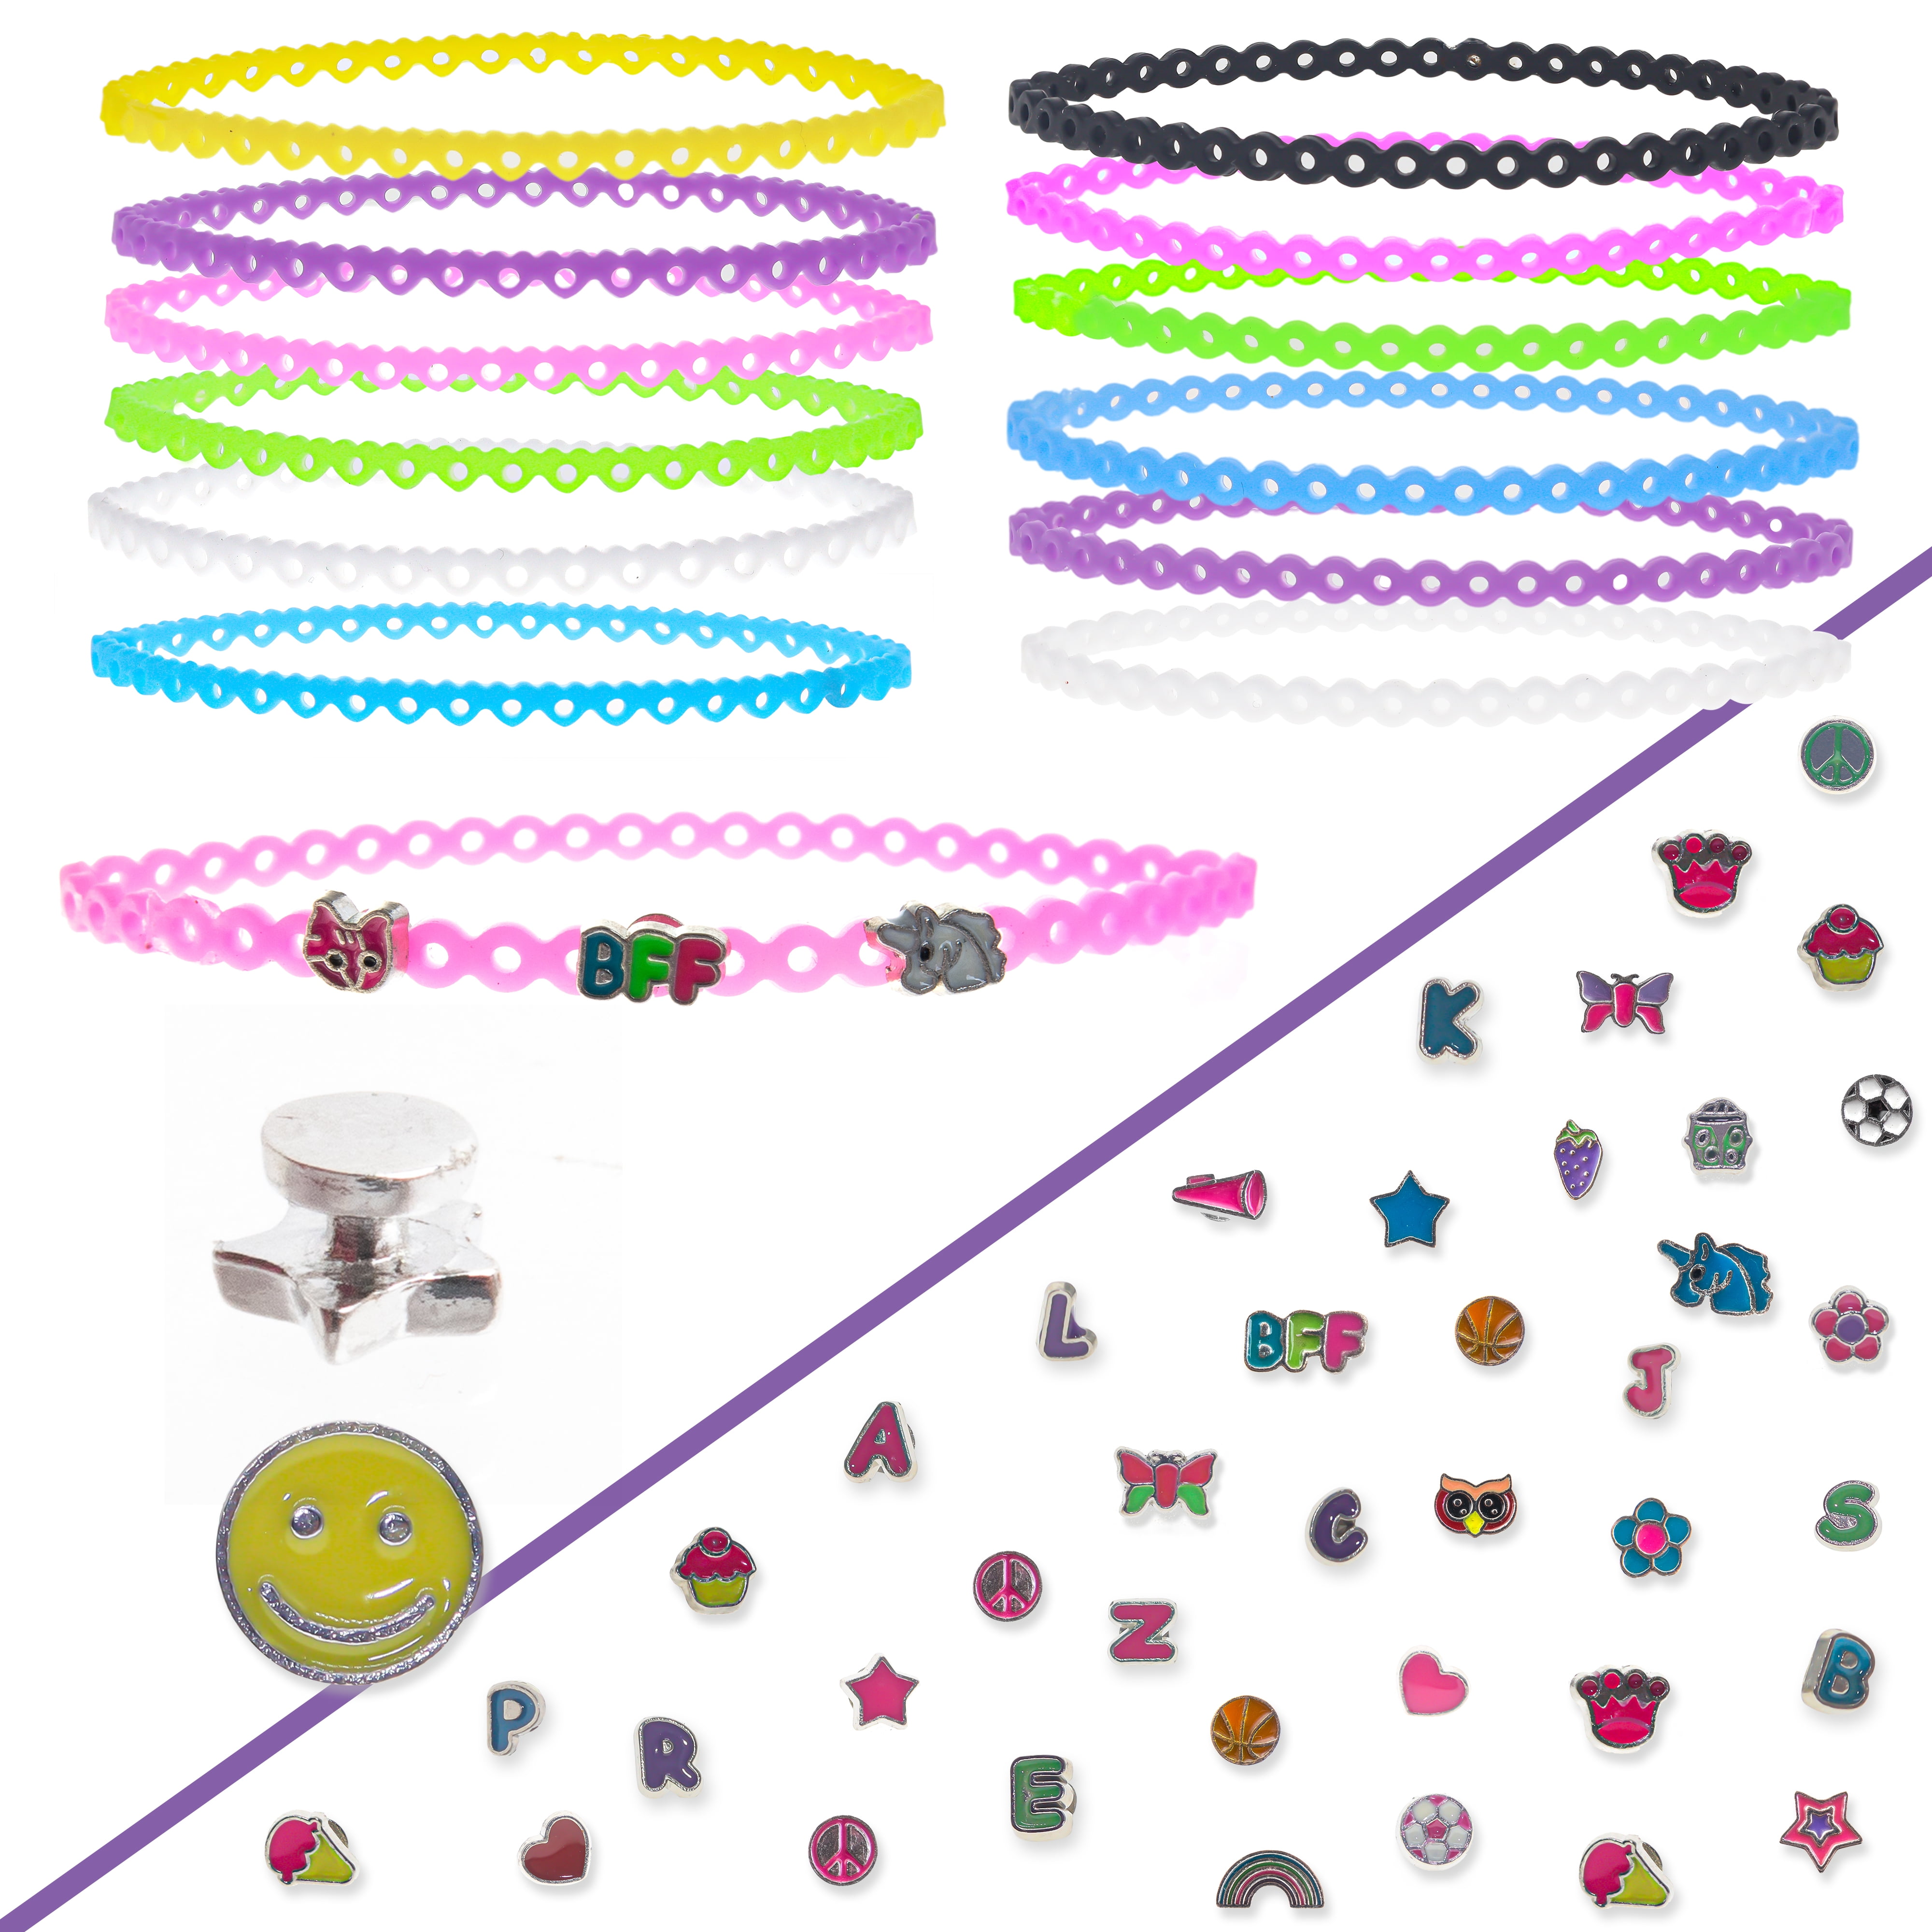 Fashion Arts and Crafts Toy DIY Jewelry Making Bracelets Craft Kits for Kids Age 6 7 8 9 10 11 12 Year Old Birthday Gift Travel Activities ZD005 Tcvents Bracelet Making kit for Girls 